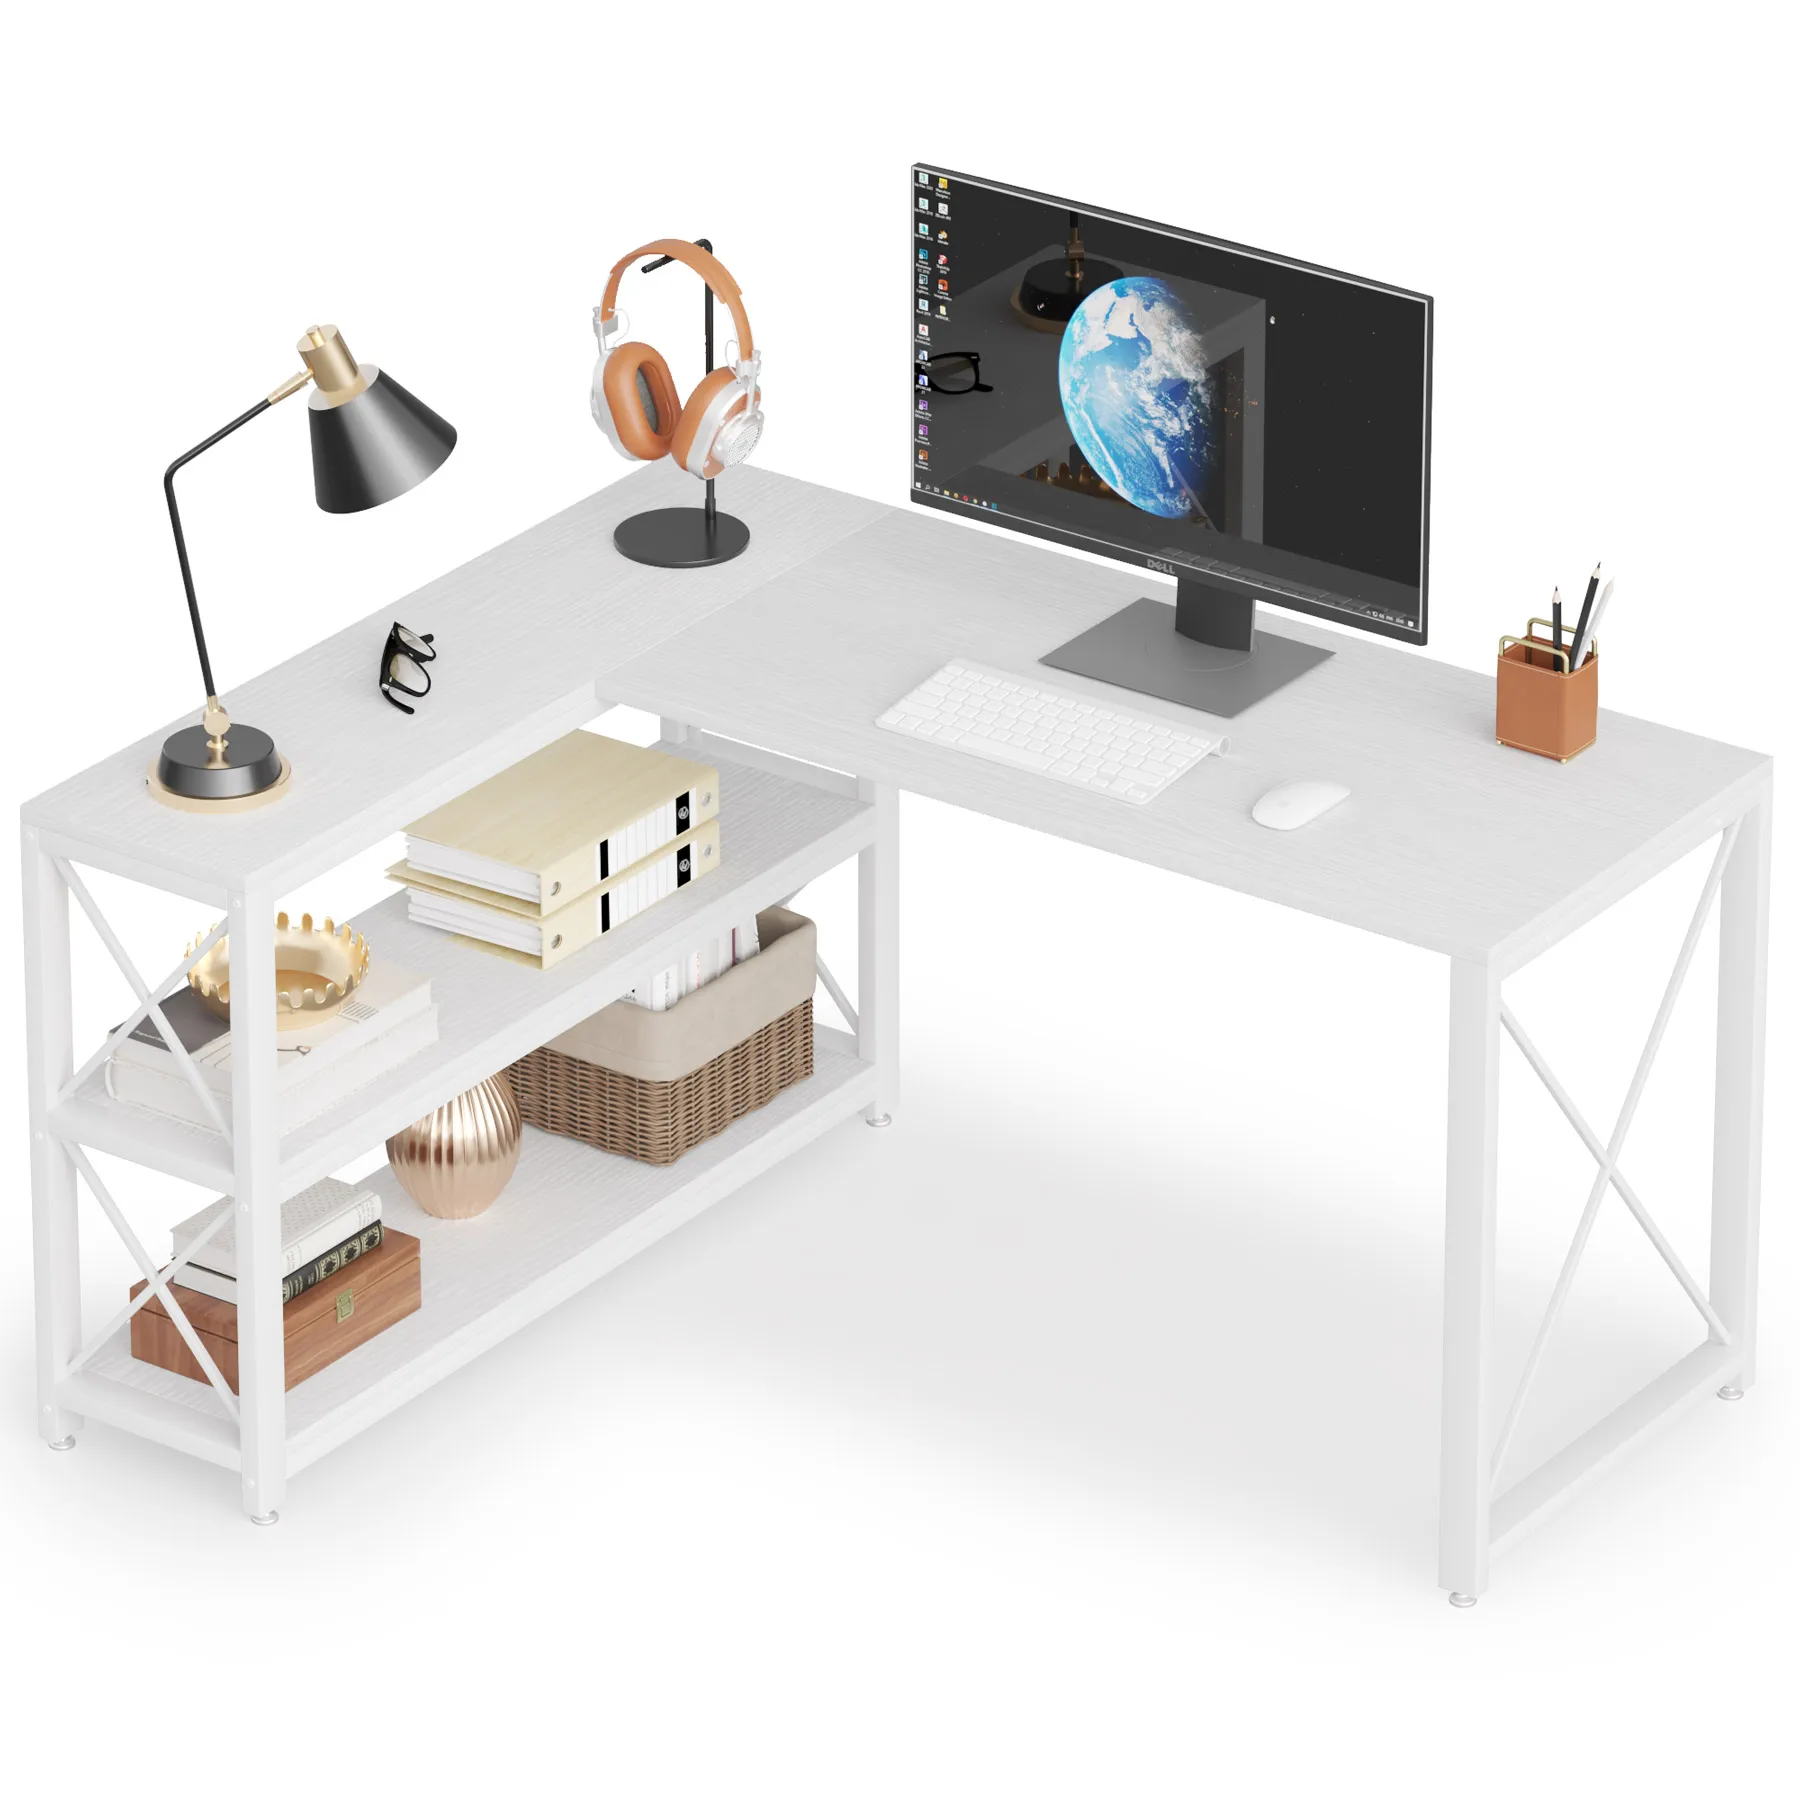 Best Working Ready Made White Table Computer Desks For Small Spaces With Storage